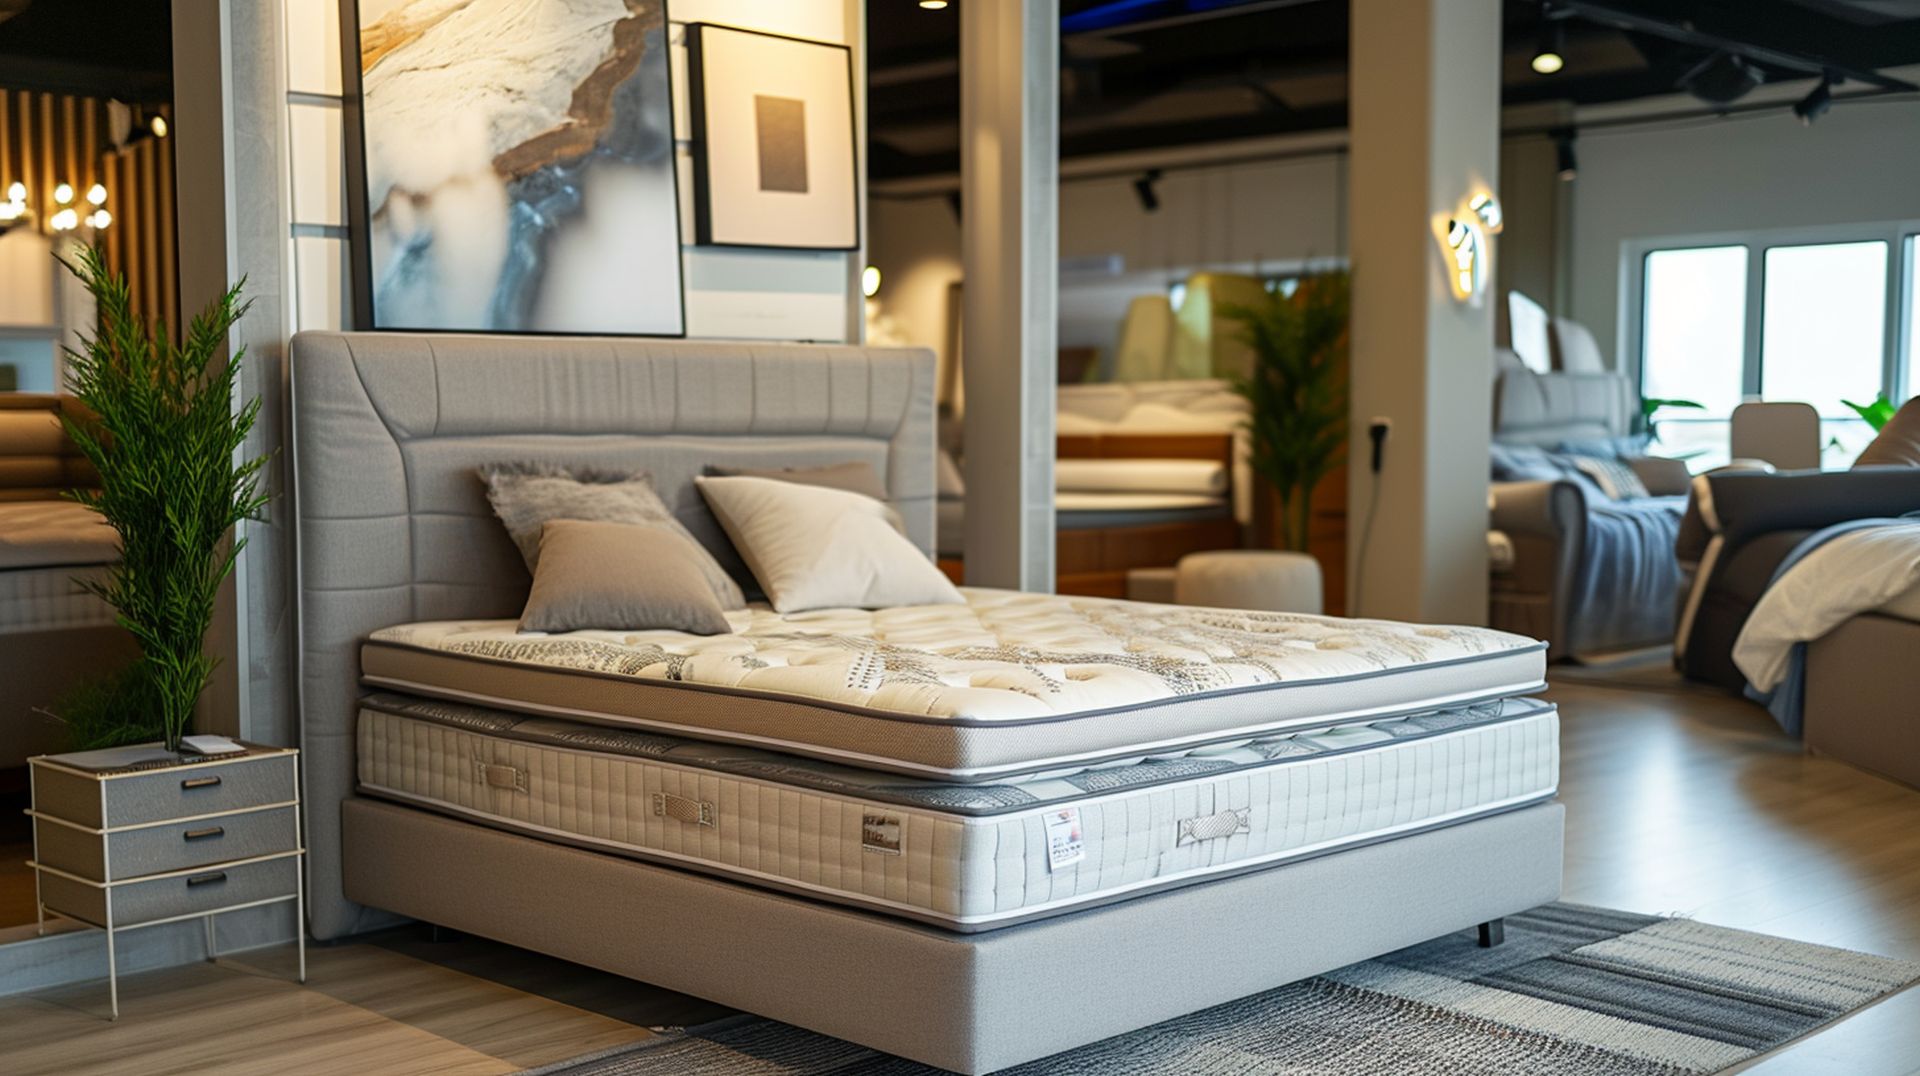 If you're looking for a new bed, mattress stores in Rancho Palos Verdes offer the best customer and delivery service, financing, and warranties in California